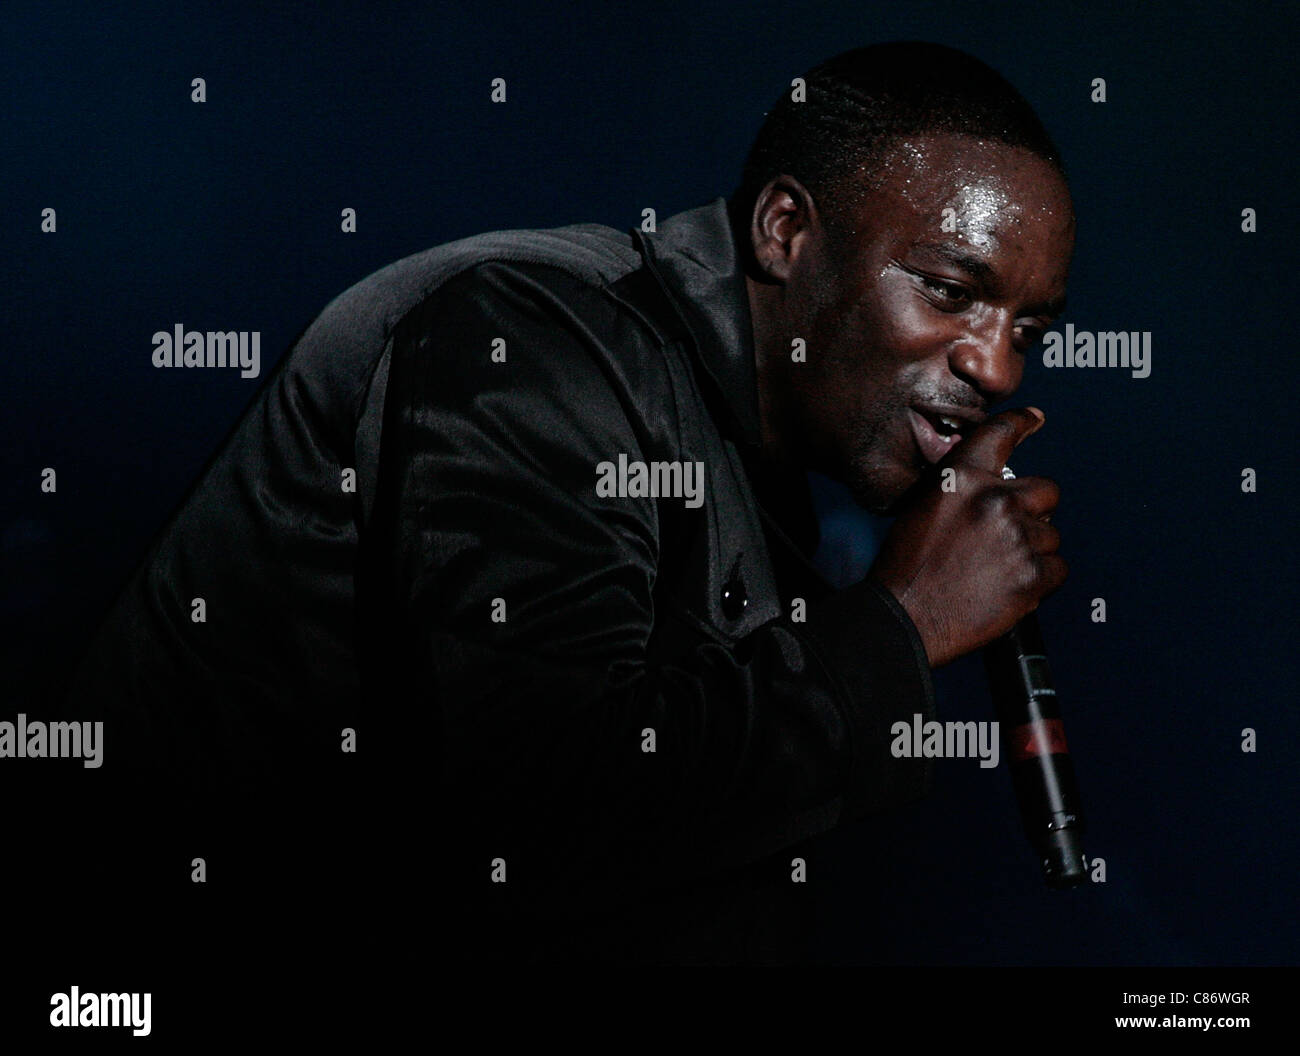 BELFAST, UNITED KINGDOM - JANUARY 28: Akon performs at the Odyssey Arena on January 28, 2009 in Belfast, Northern Ireland Stock Photo